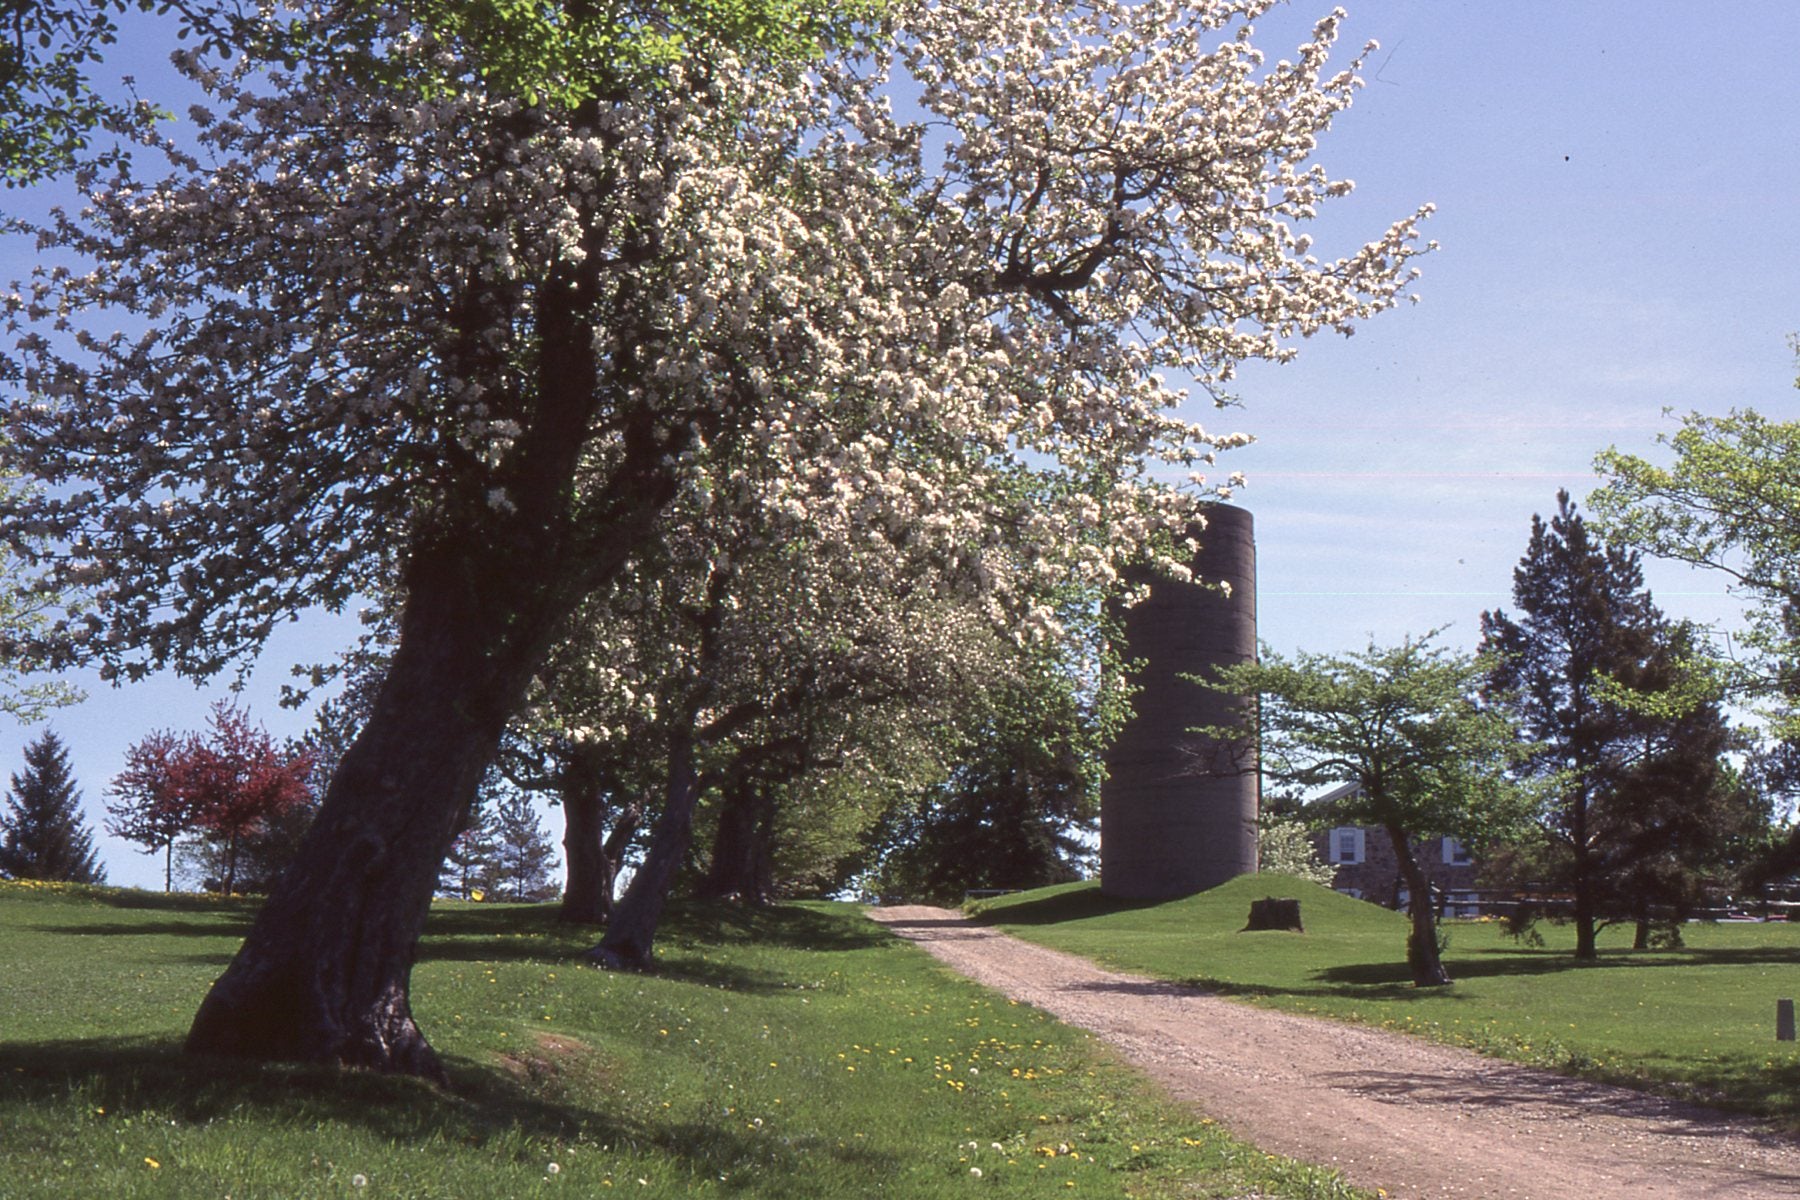 A large apple tree in bloom, with the silo in the background